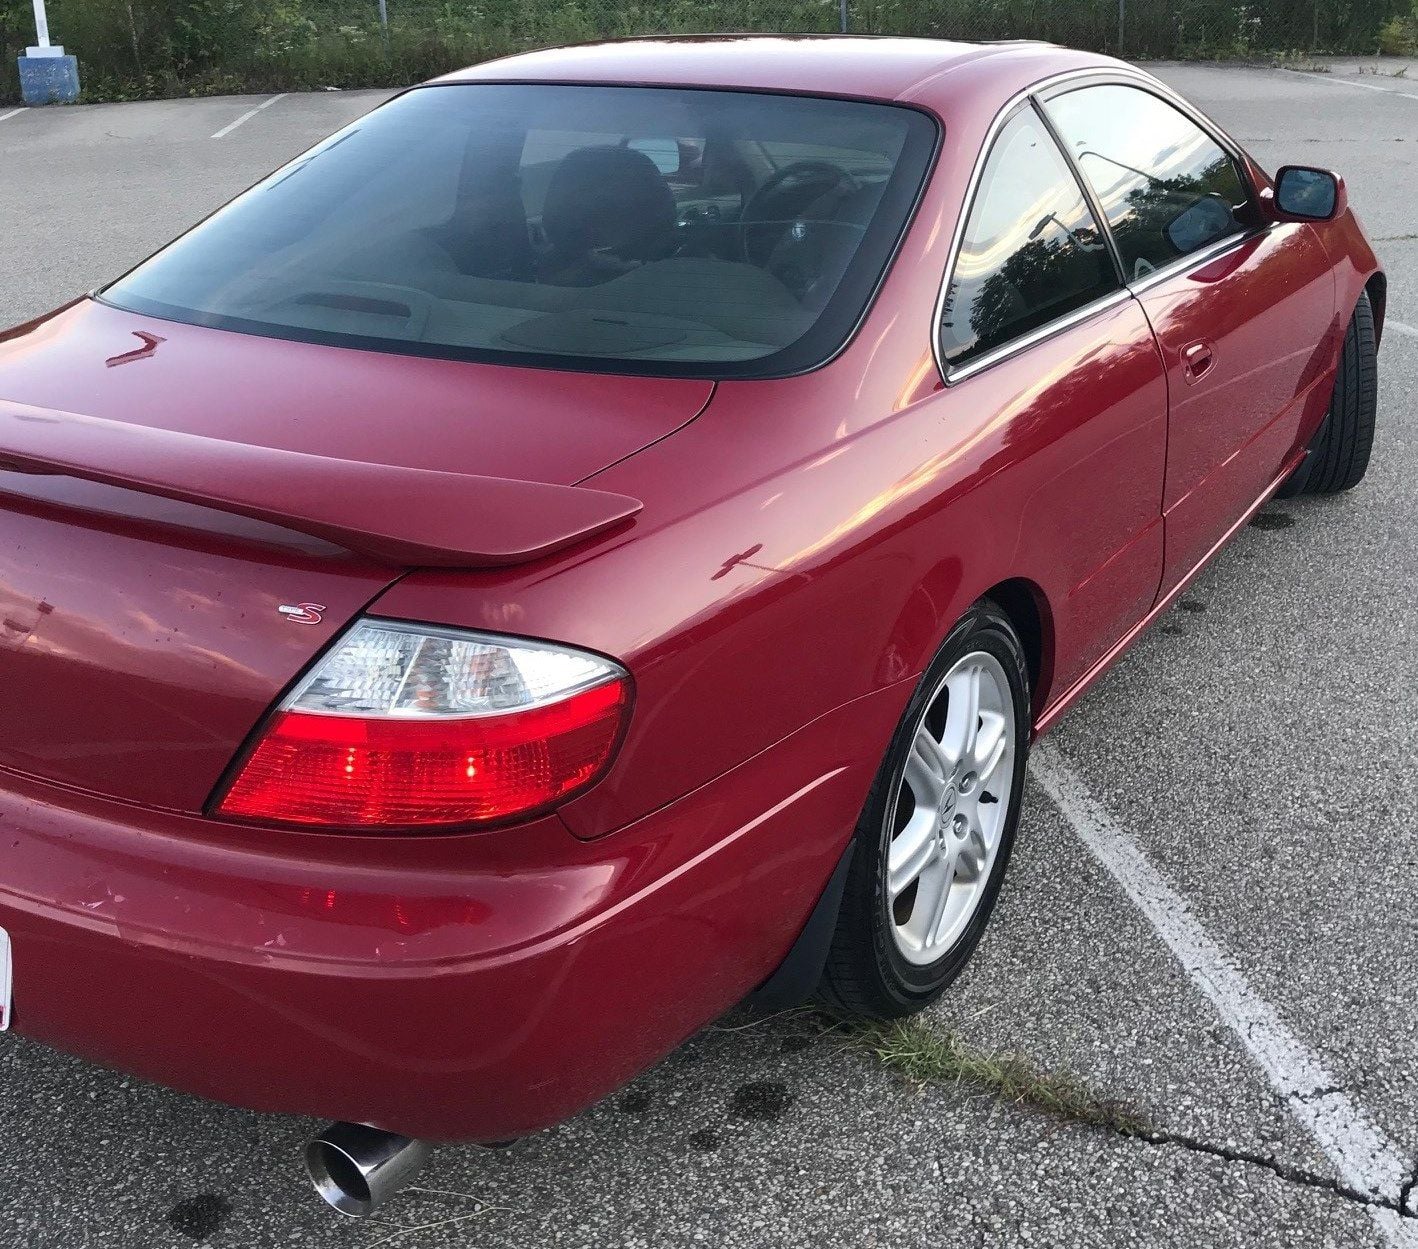 2003 Acura CL - SOLD: '03 Acura CL Type-S w/ 6sp M/T - Used - VIN 19UYA41633A008863 - 192,000 Miles - 6 cyl - 2WD - Manual - Coupe - Red - Cincinnati, OH 45247, United States